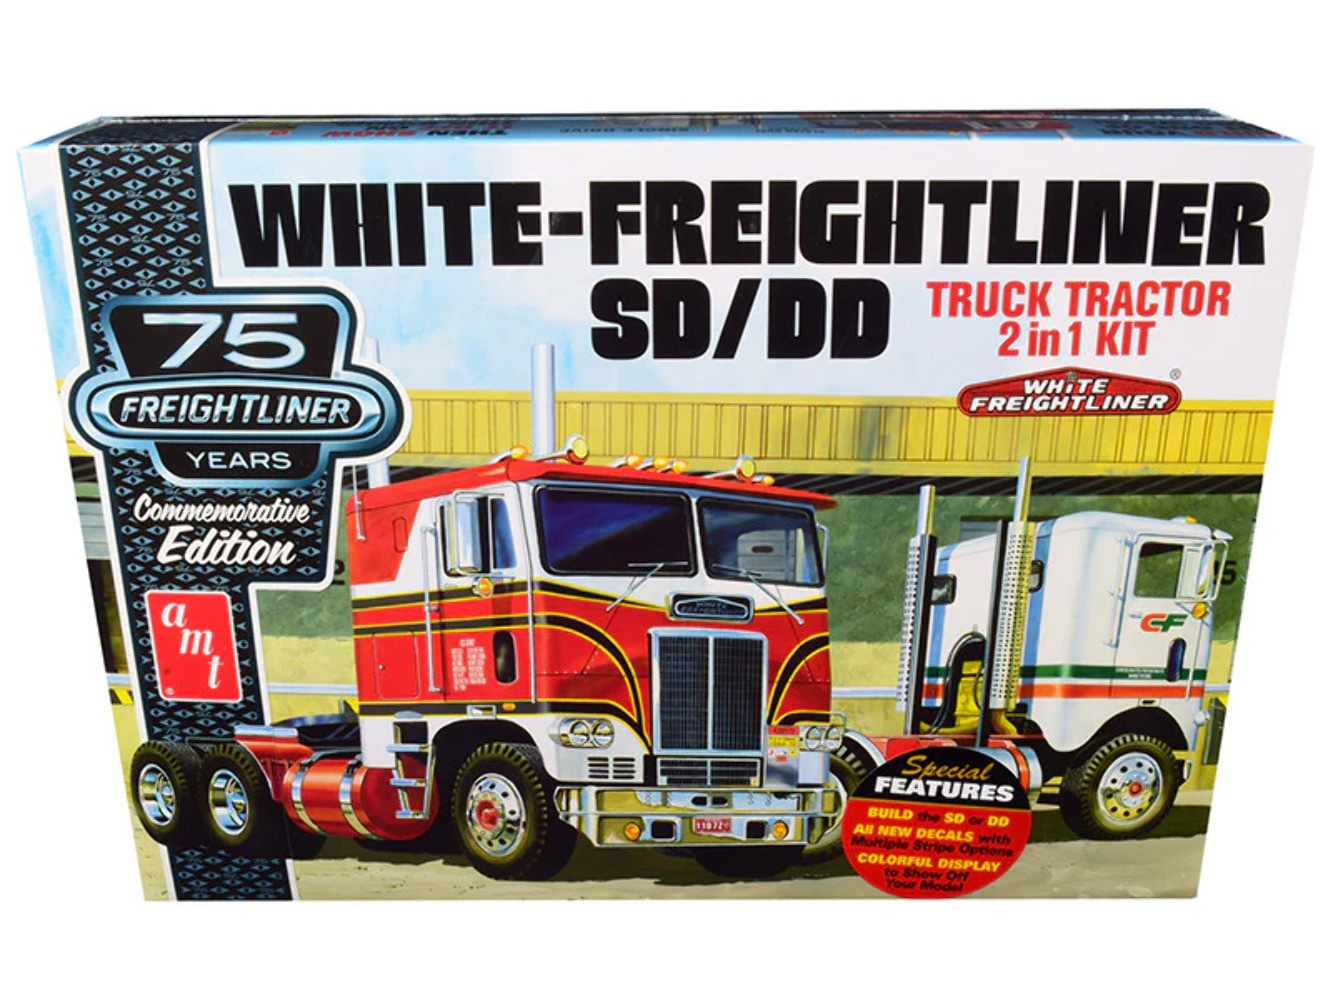 Skill 3 Model Kit White Freightliner SD/DD Truck Tractor 2-in-1 Kit with Display